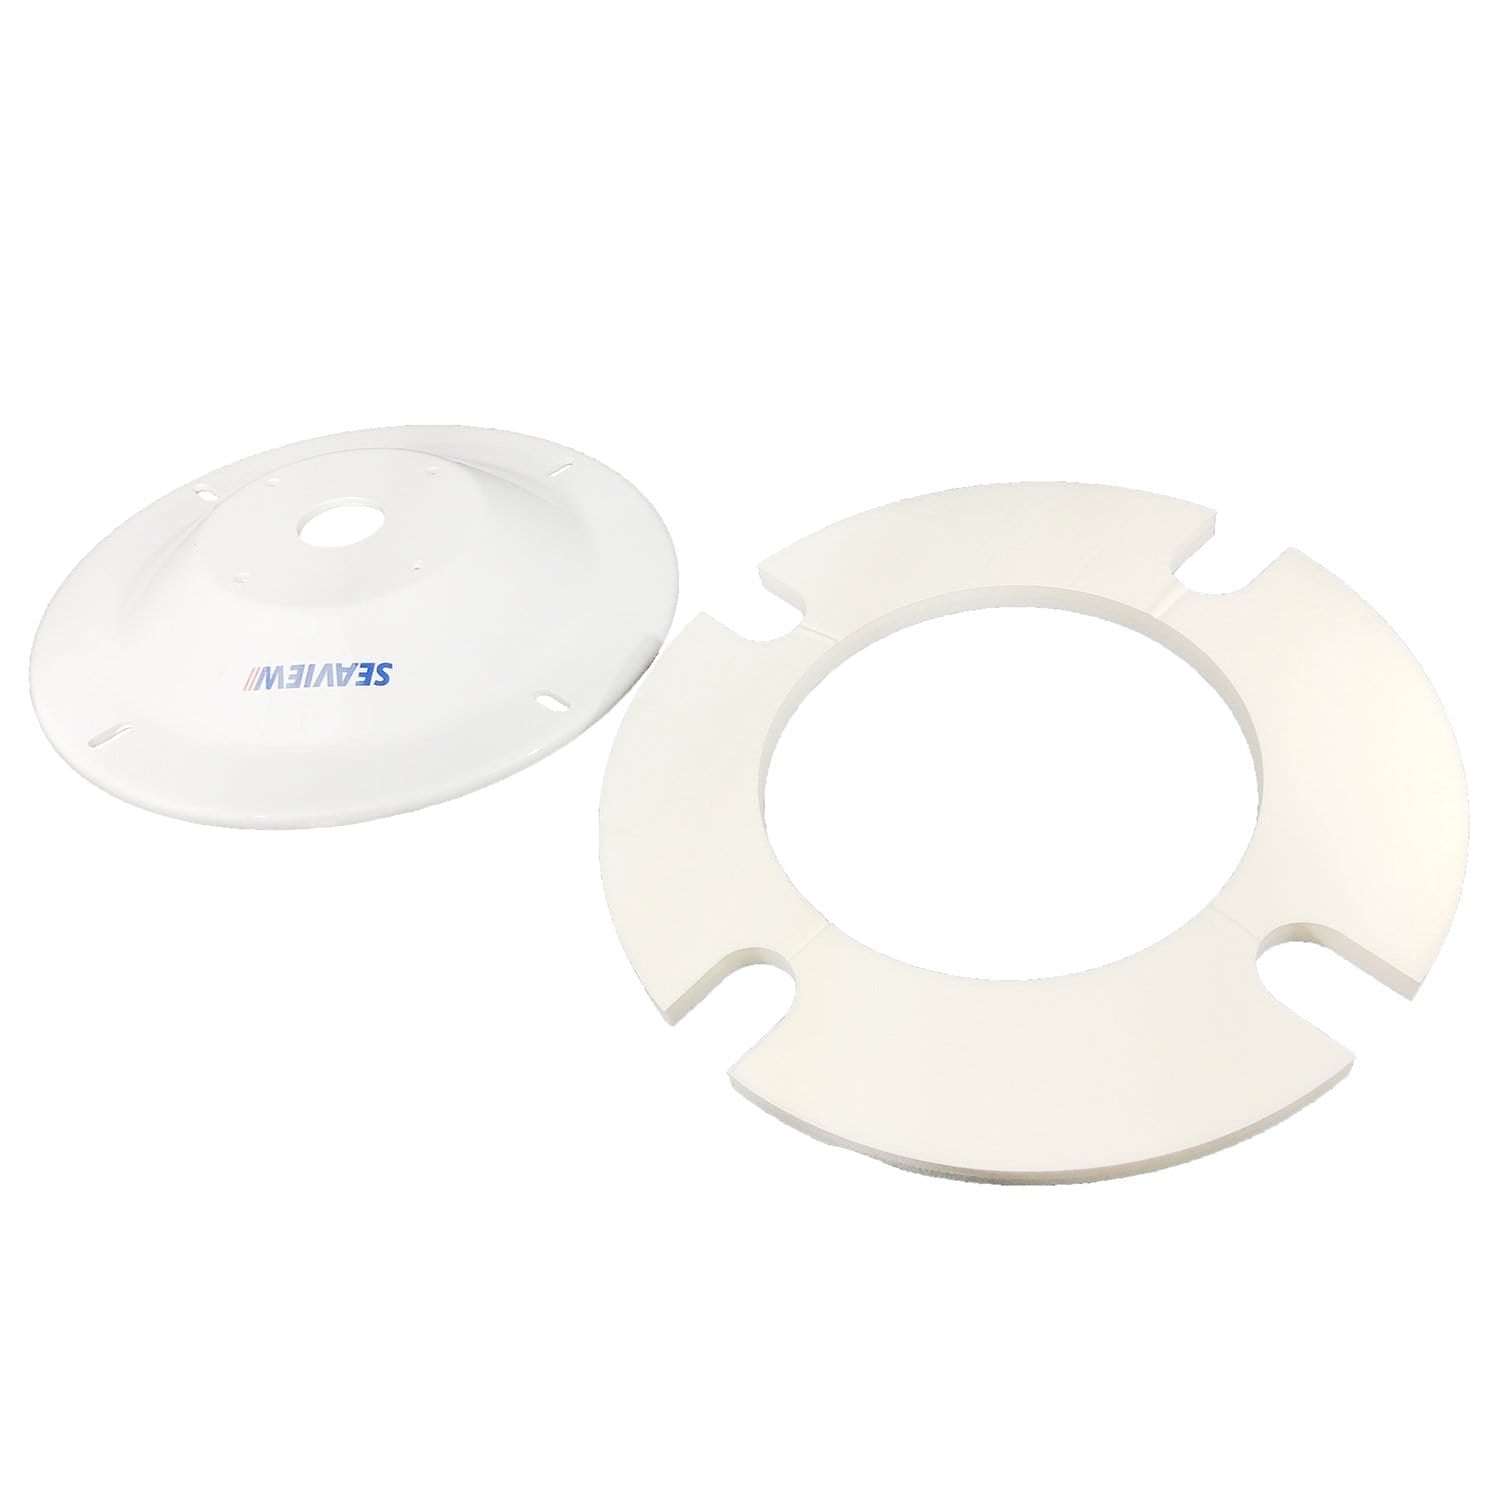 Seaview AMA24 2.70" Tall Low Profile Adapter, 8" Round Base Plate